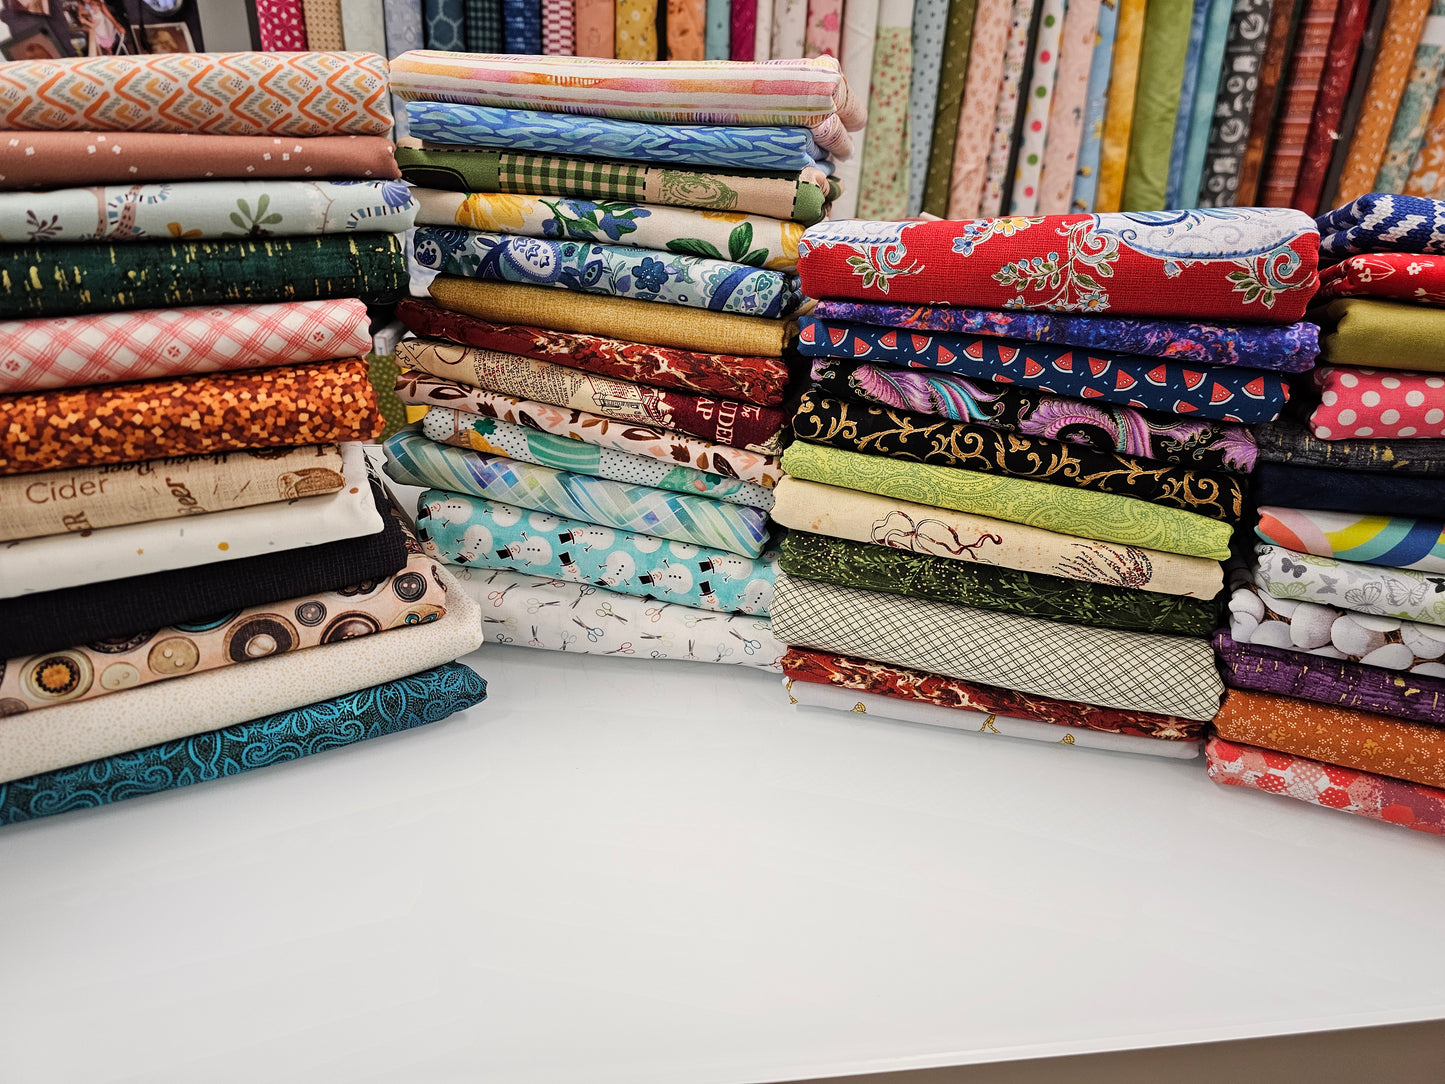 MYSTERY QUILTING COTTON  BUNDLE:  15 YARDS - 1 YARD CUTS NO REPEATS SHIPPING INCLUDED